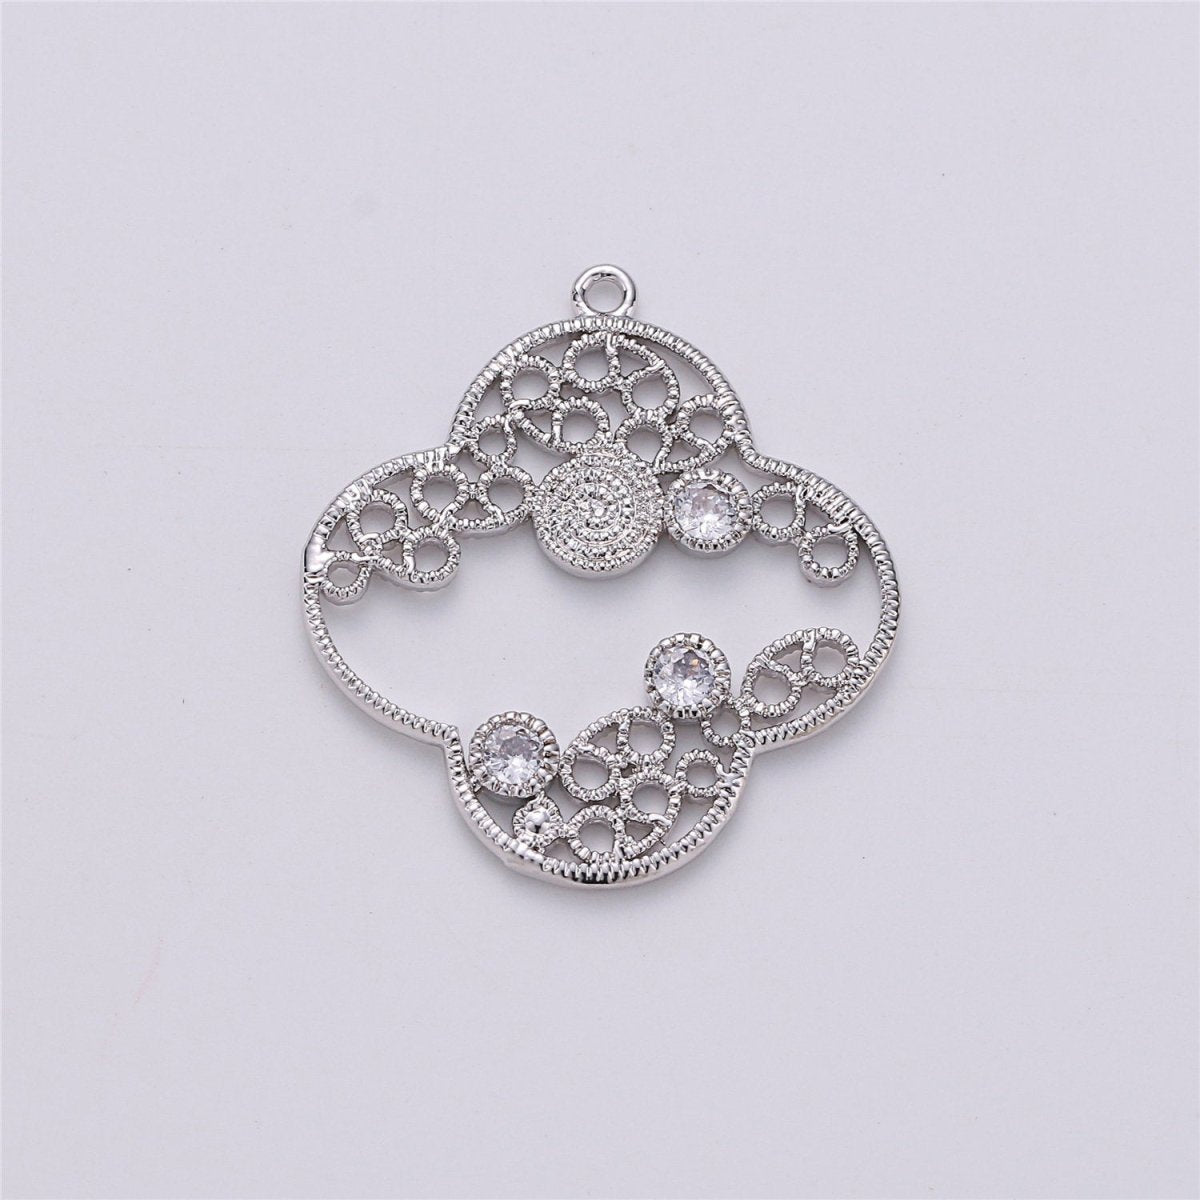 On Sale! CLEARANCE! Four Leaf Clover Charm in Rhodium White Gold with Cubic Zircon Pendant for Necklace Earring Jewelry Making inspired quatrefoil clover E-486 - DLUXCA